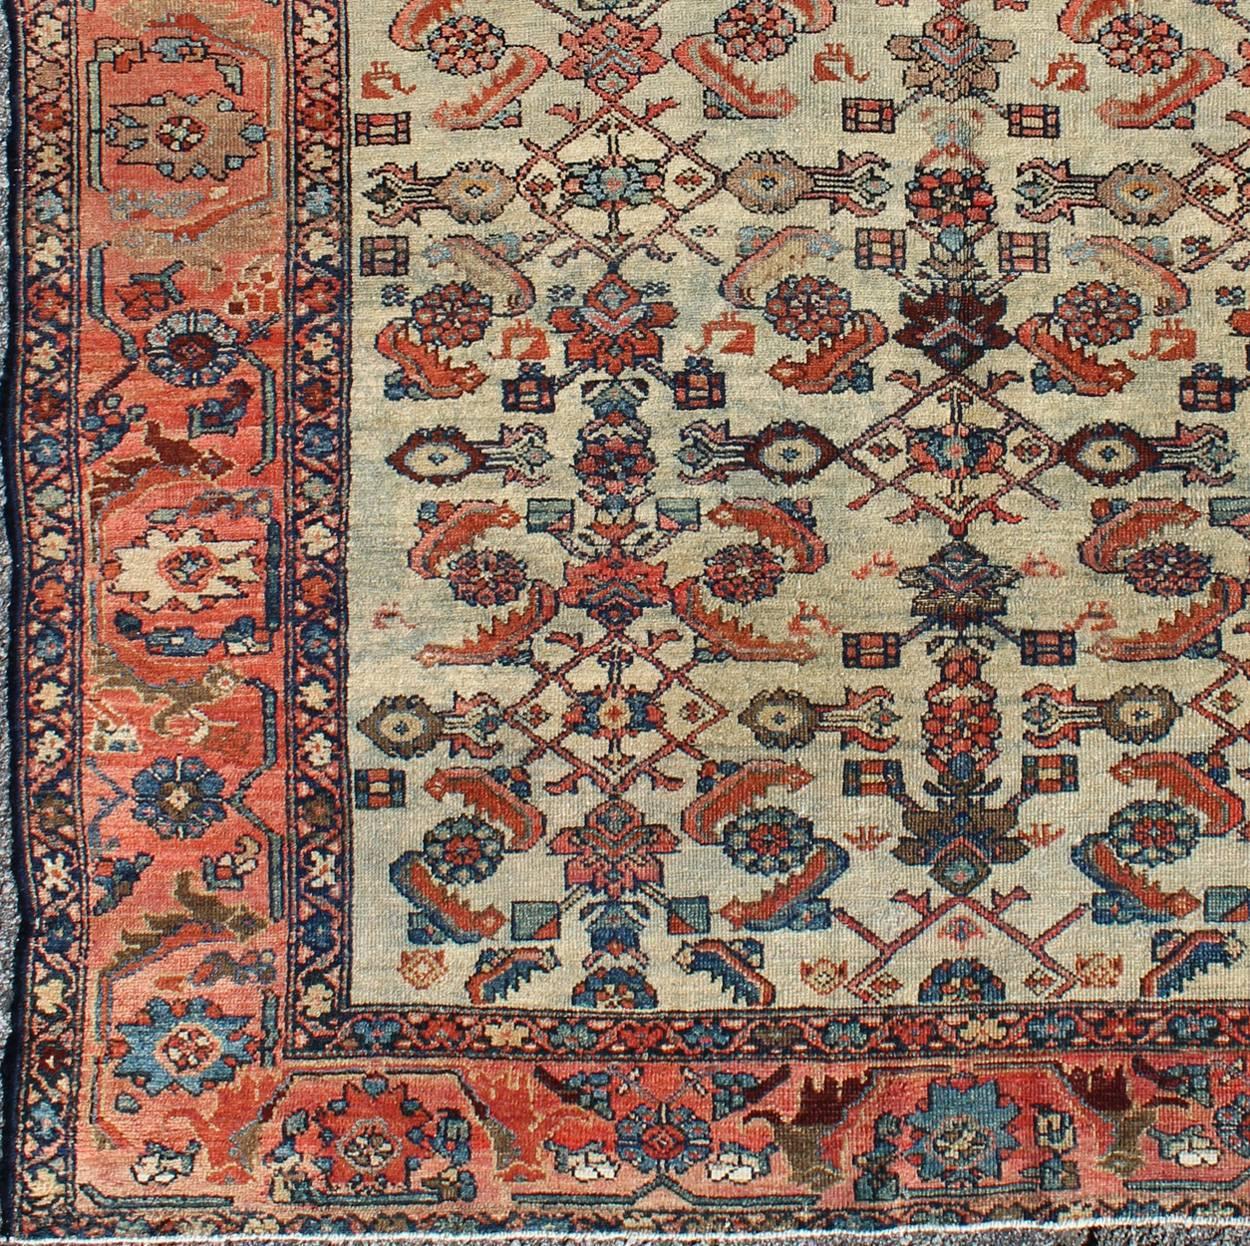 Antique Persian Malayer rug with all-over sub-geometric design in red and blue, rug s12-1103, country of origin / type: Iran / Malayer, circa 1920

This amazing antique Malayer rug from early 20th century, circa 1920, Iran was handwoven and bears